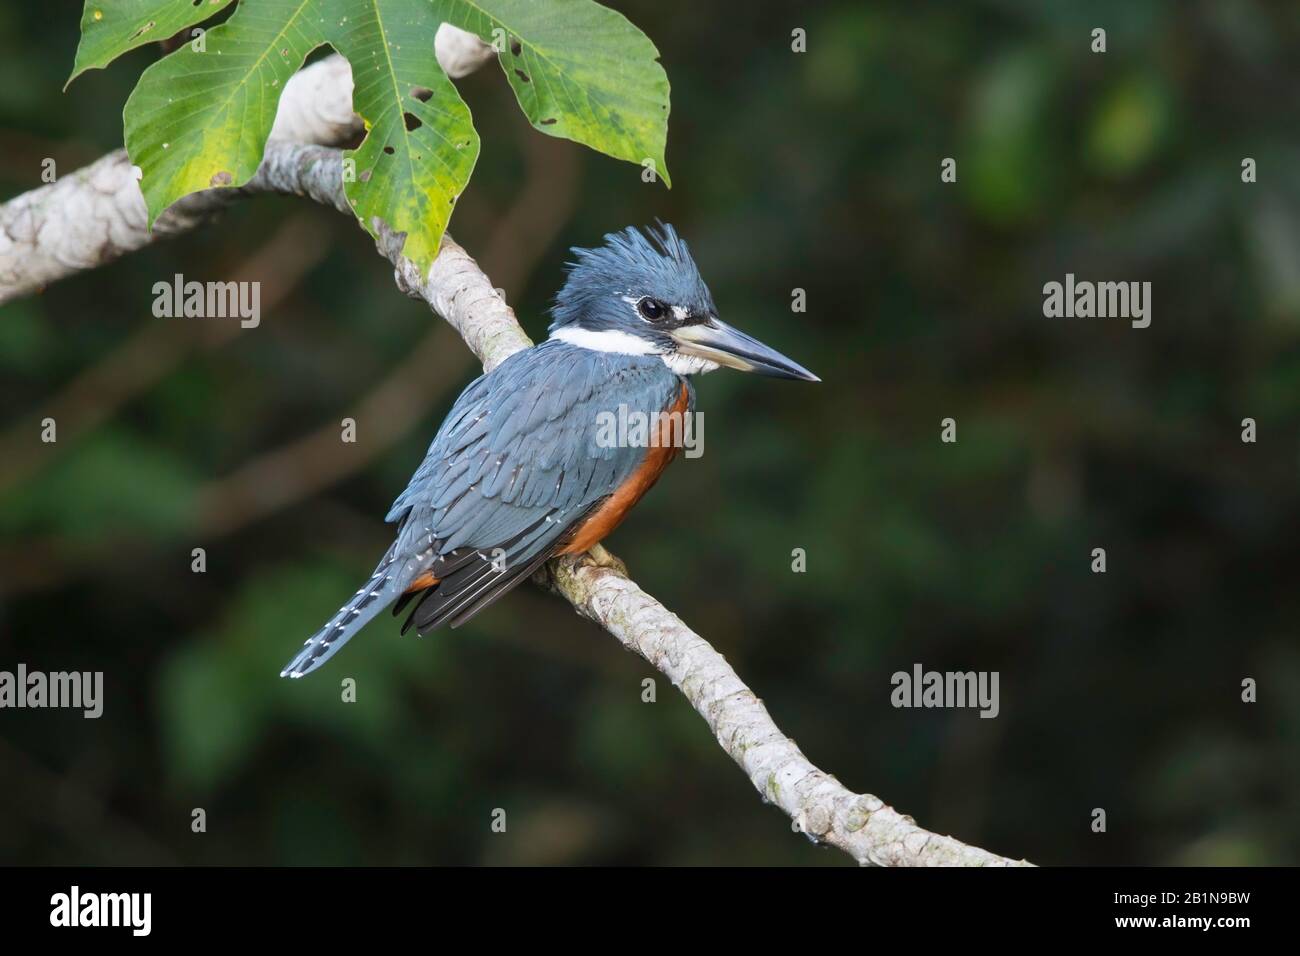 ringed kingfisher (Megaceryle torquata), on a branch, South America Stock Photo